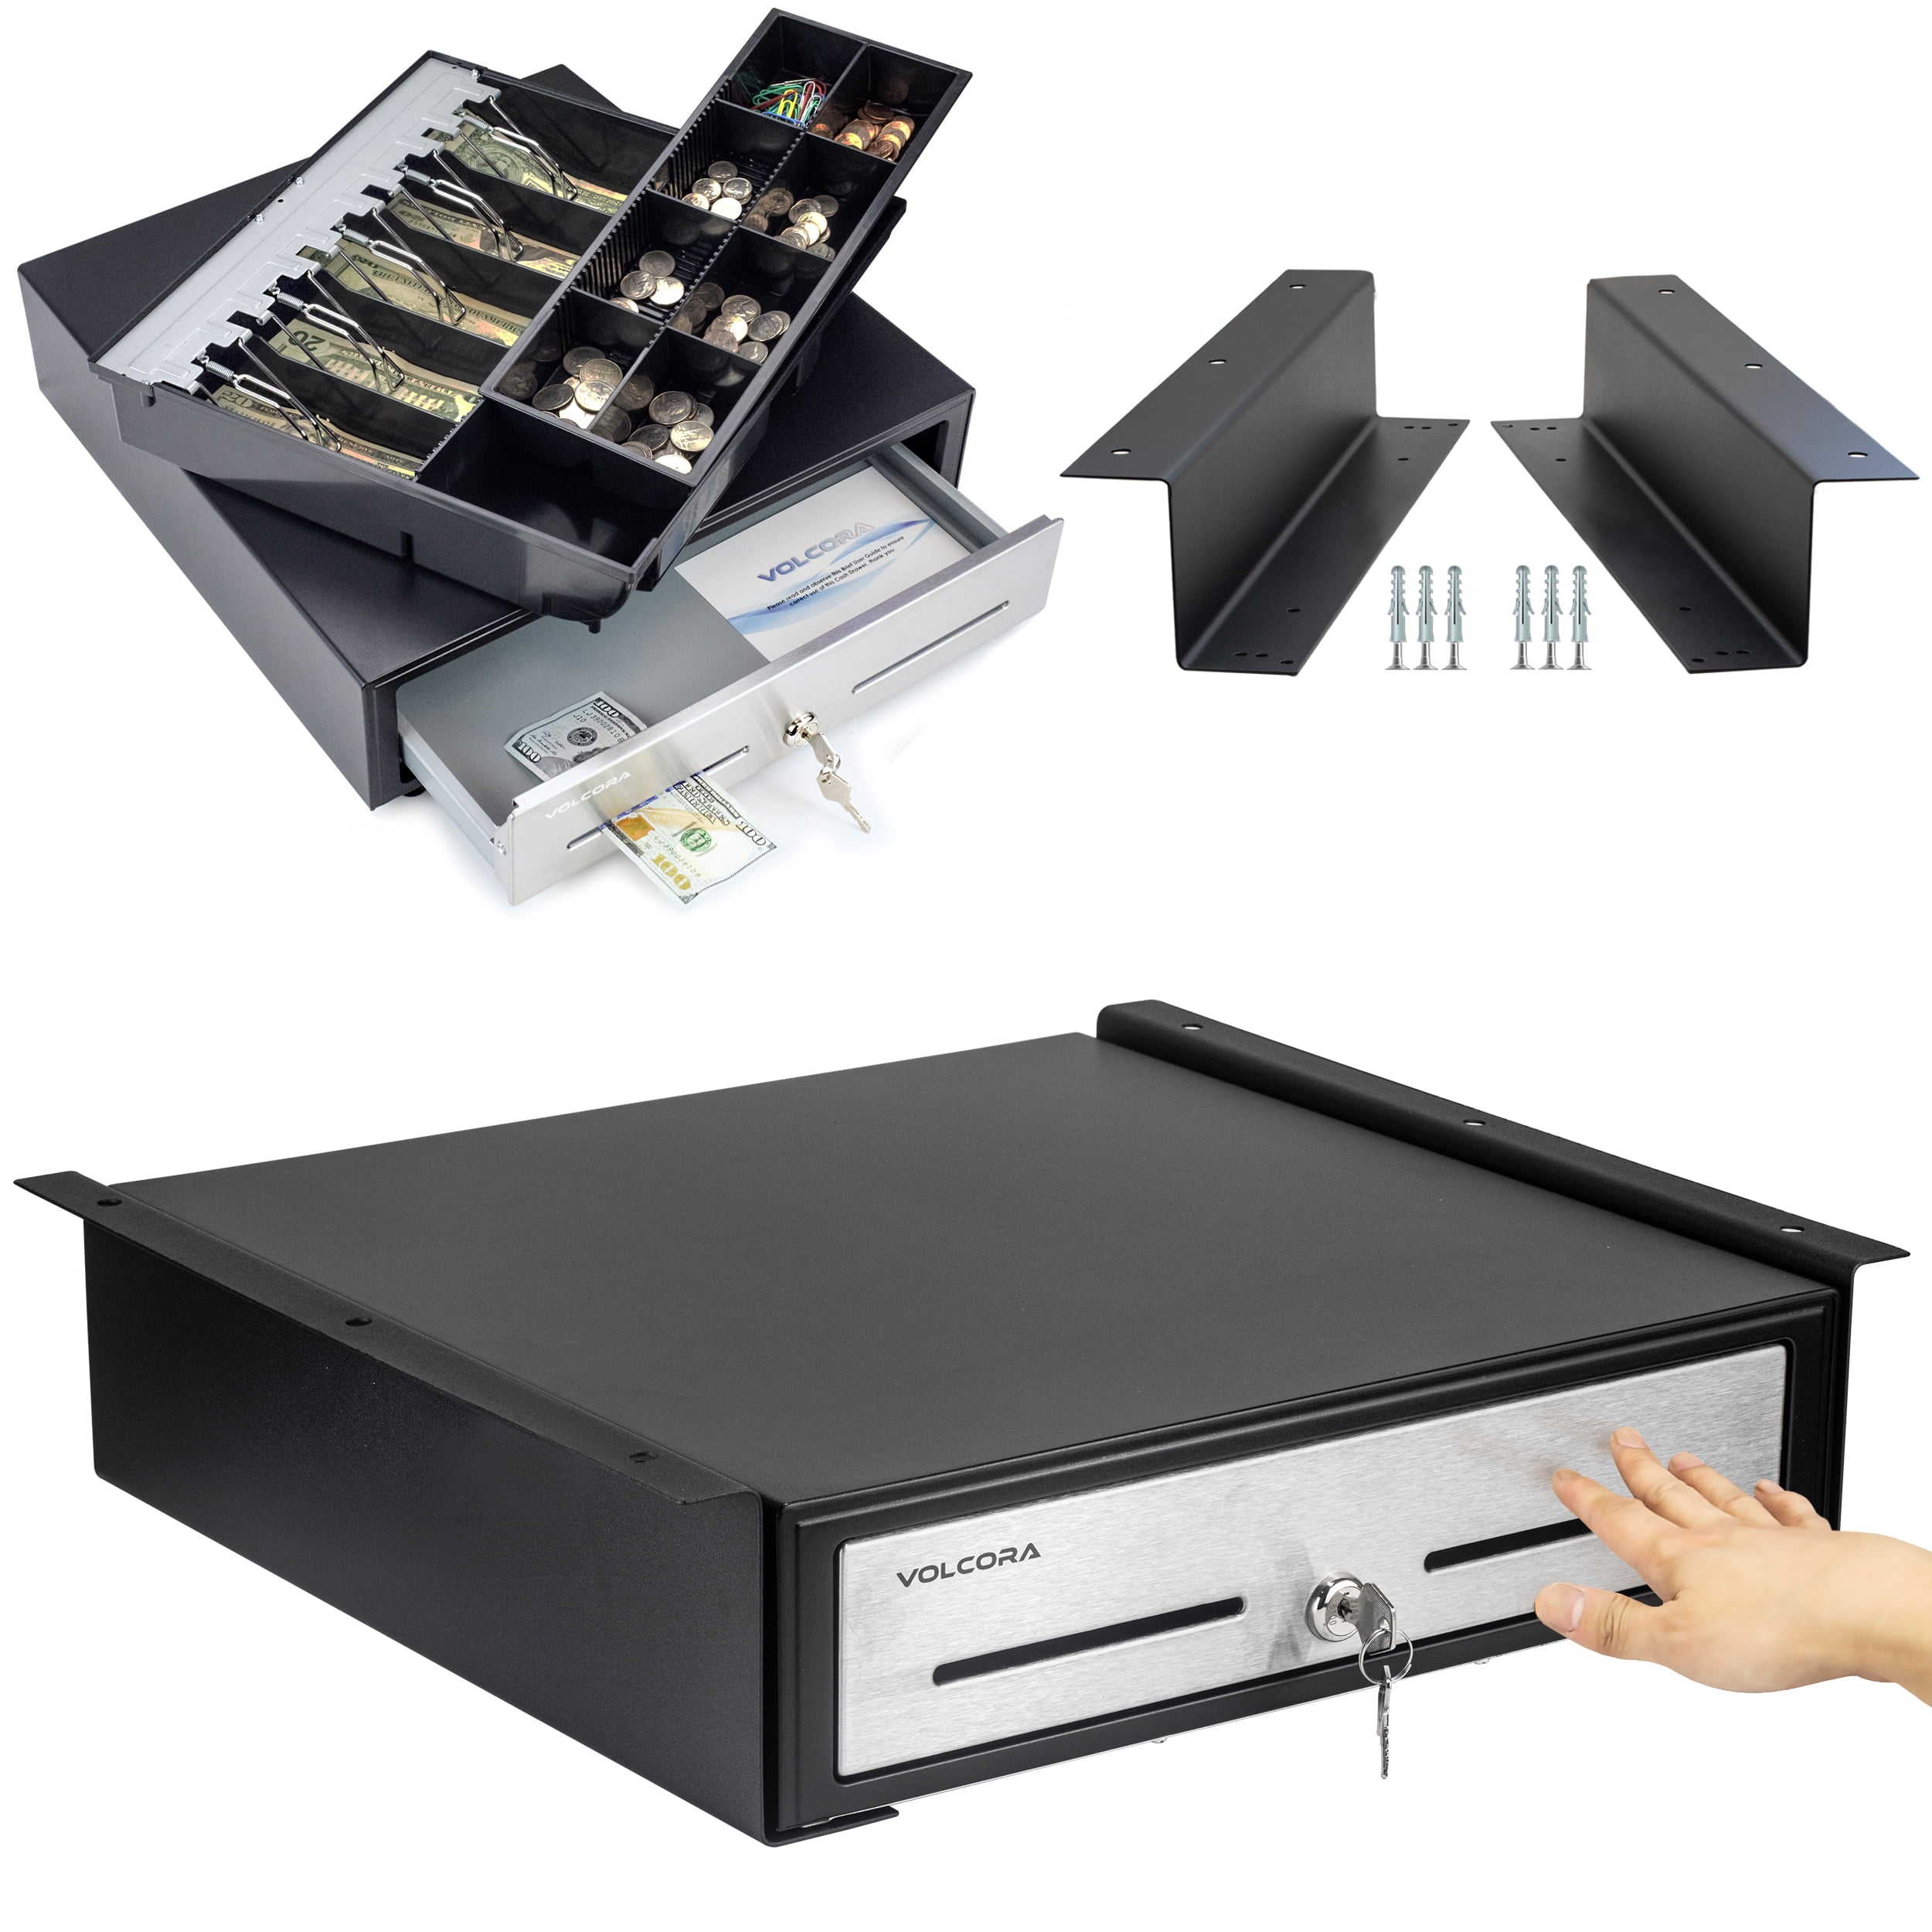 Black 2252843T04 STEELMASTER Replacement Cash Tray for 1046T Touch Release Locking Cash Drawer